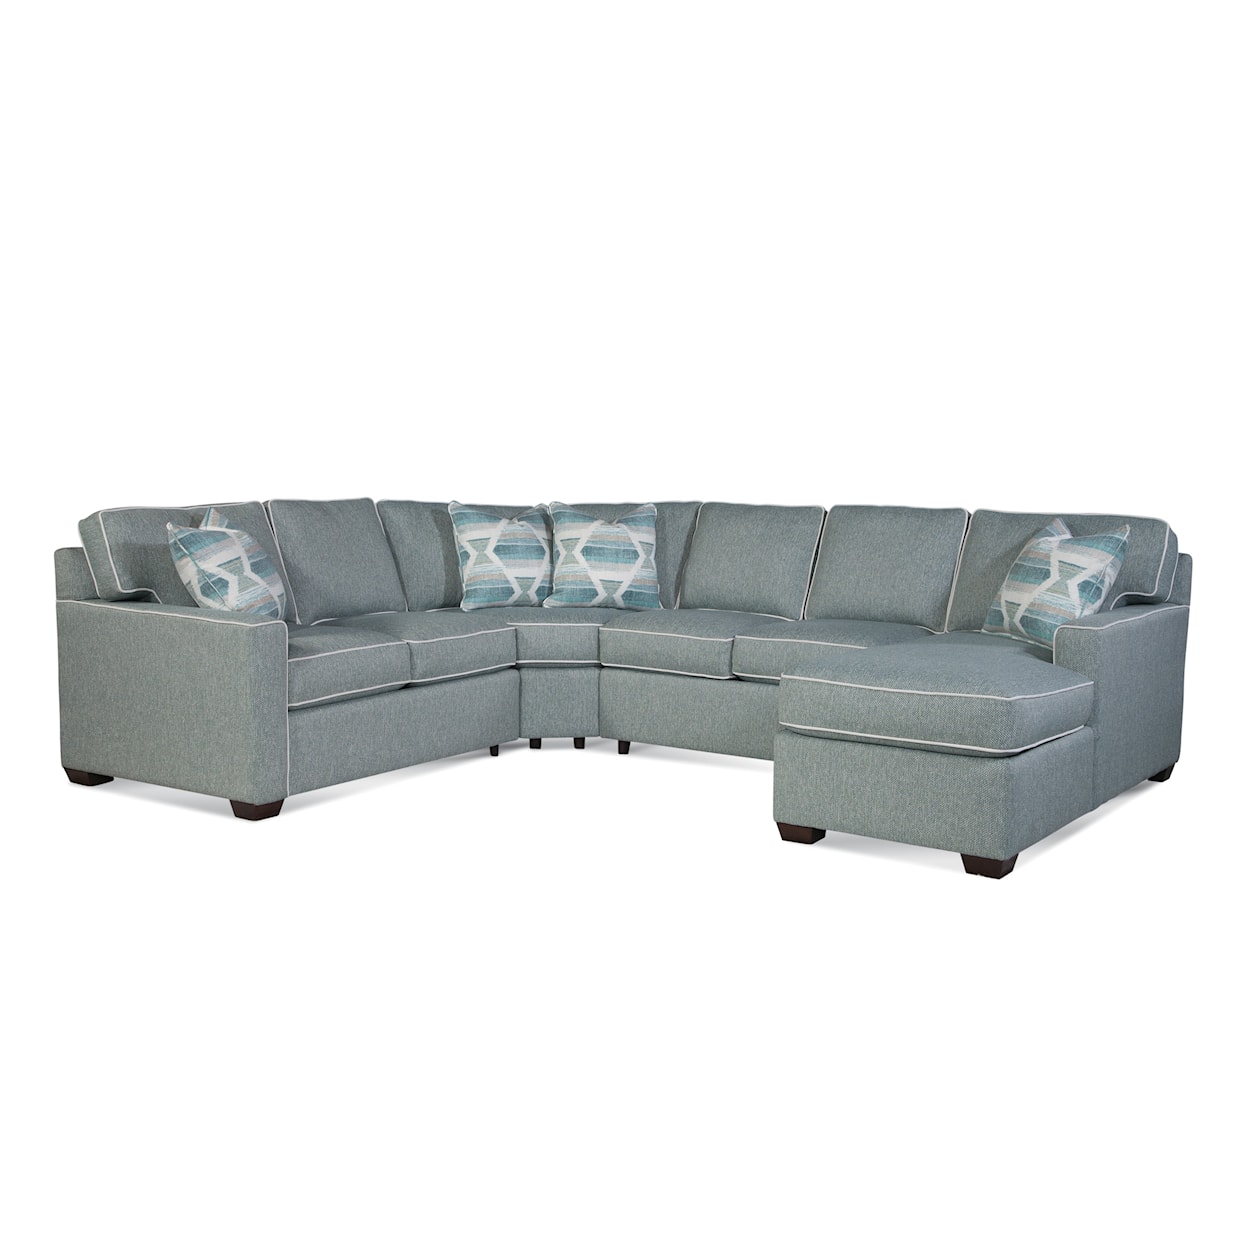 Braxton Culler Easton 4-Piece Chaise Sectional